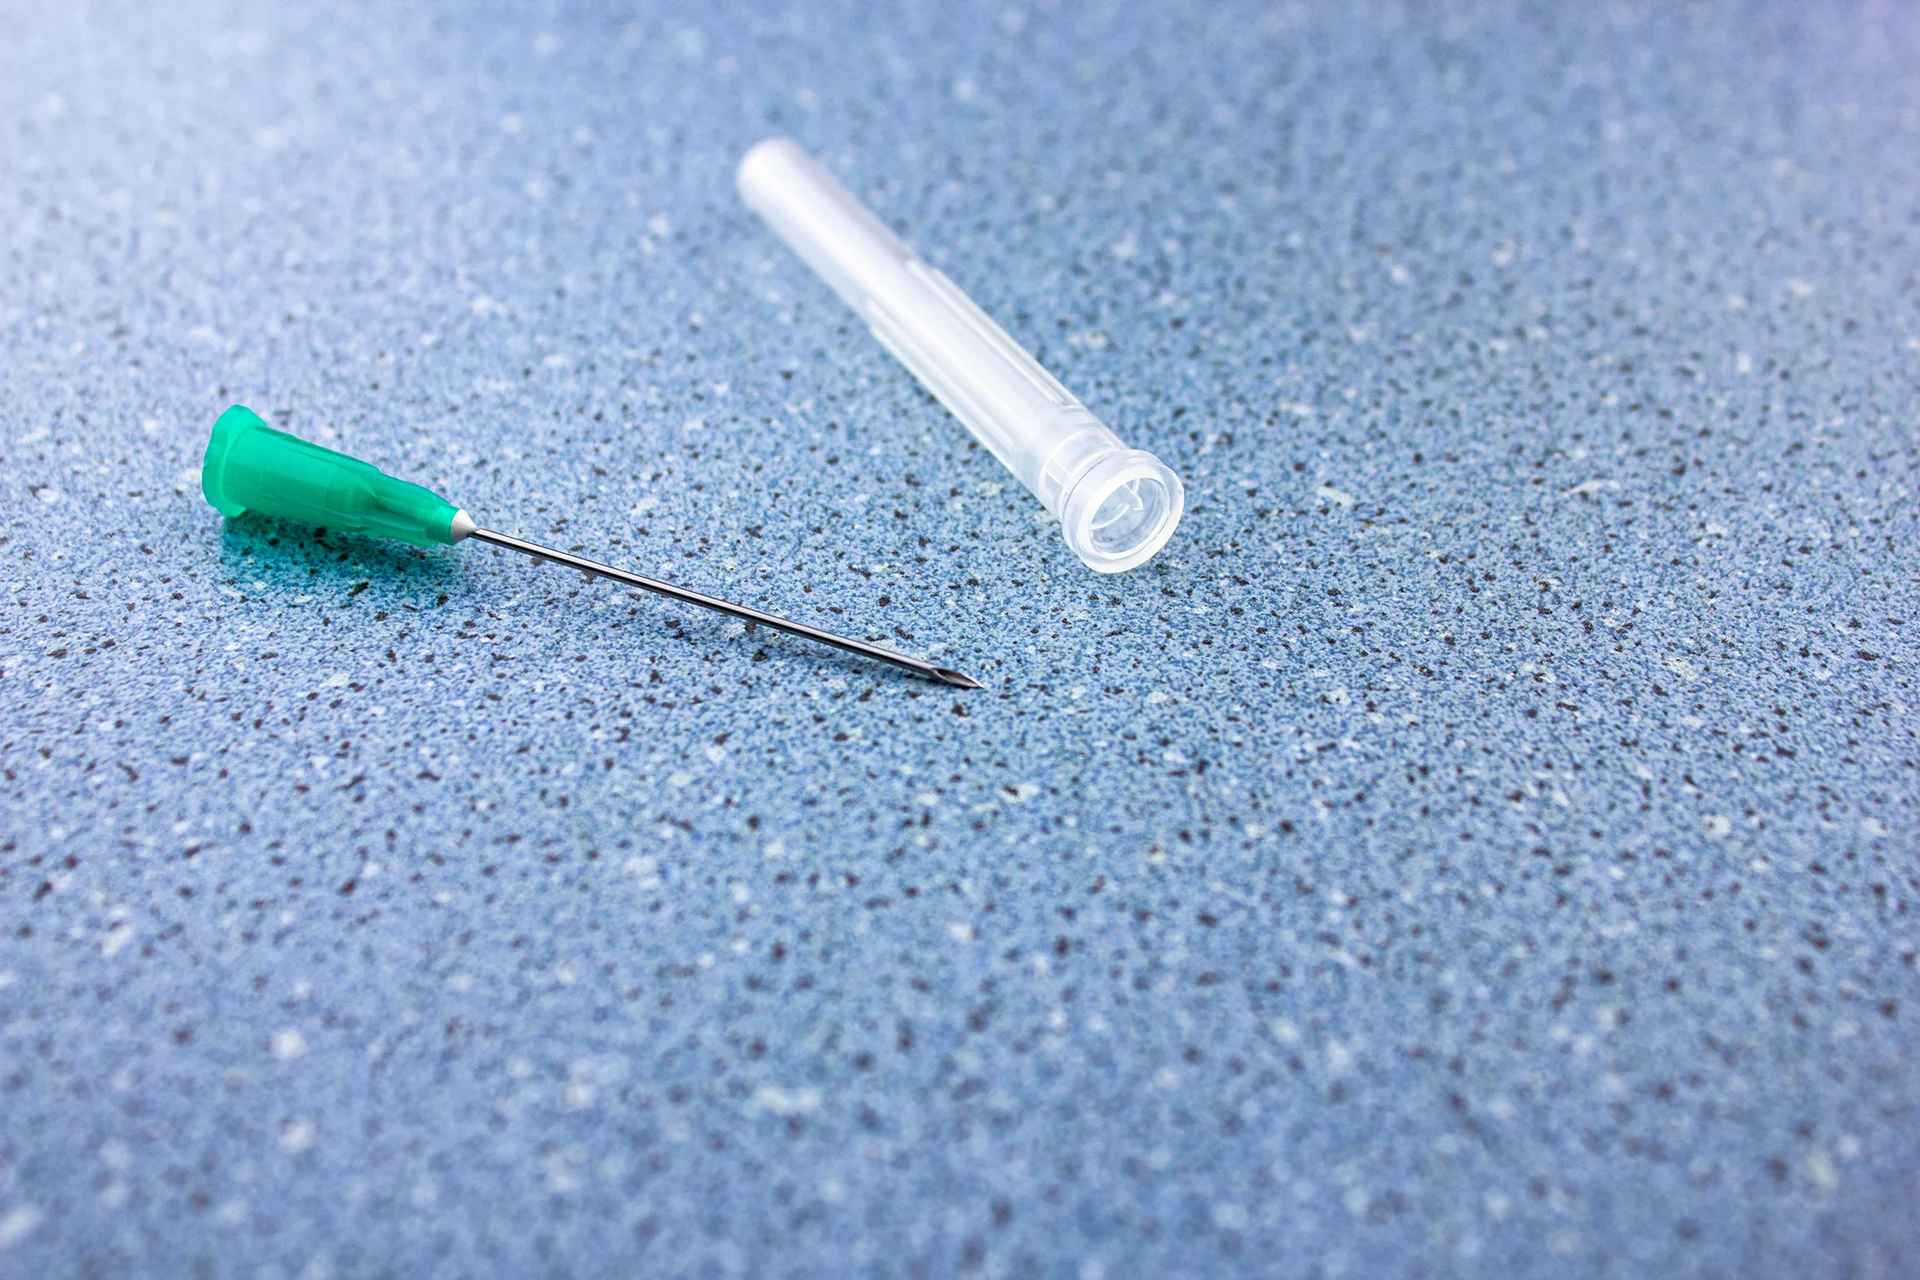 how to sharpen a hypodermic needle